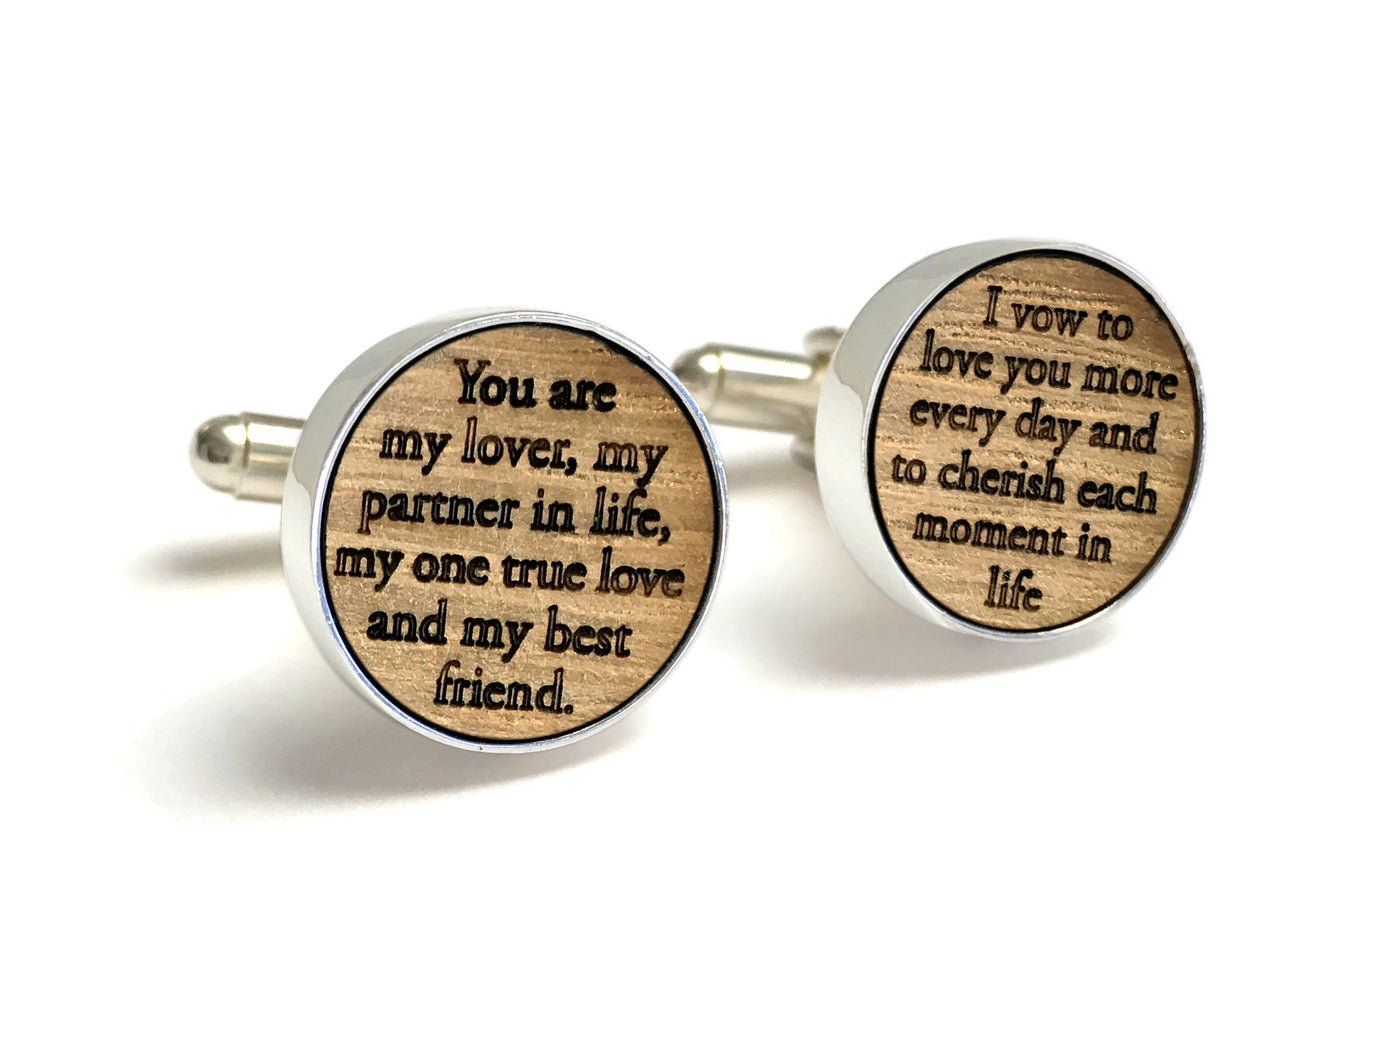 5th Anniversary Gifts For Him - Whiskey Wood Cufflinks Engraved With Vows 